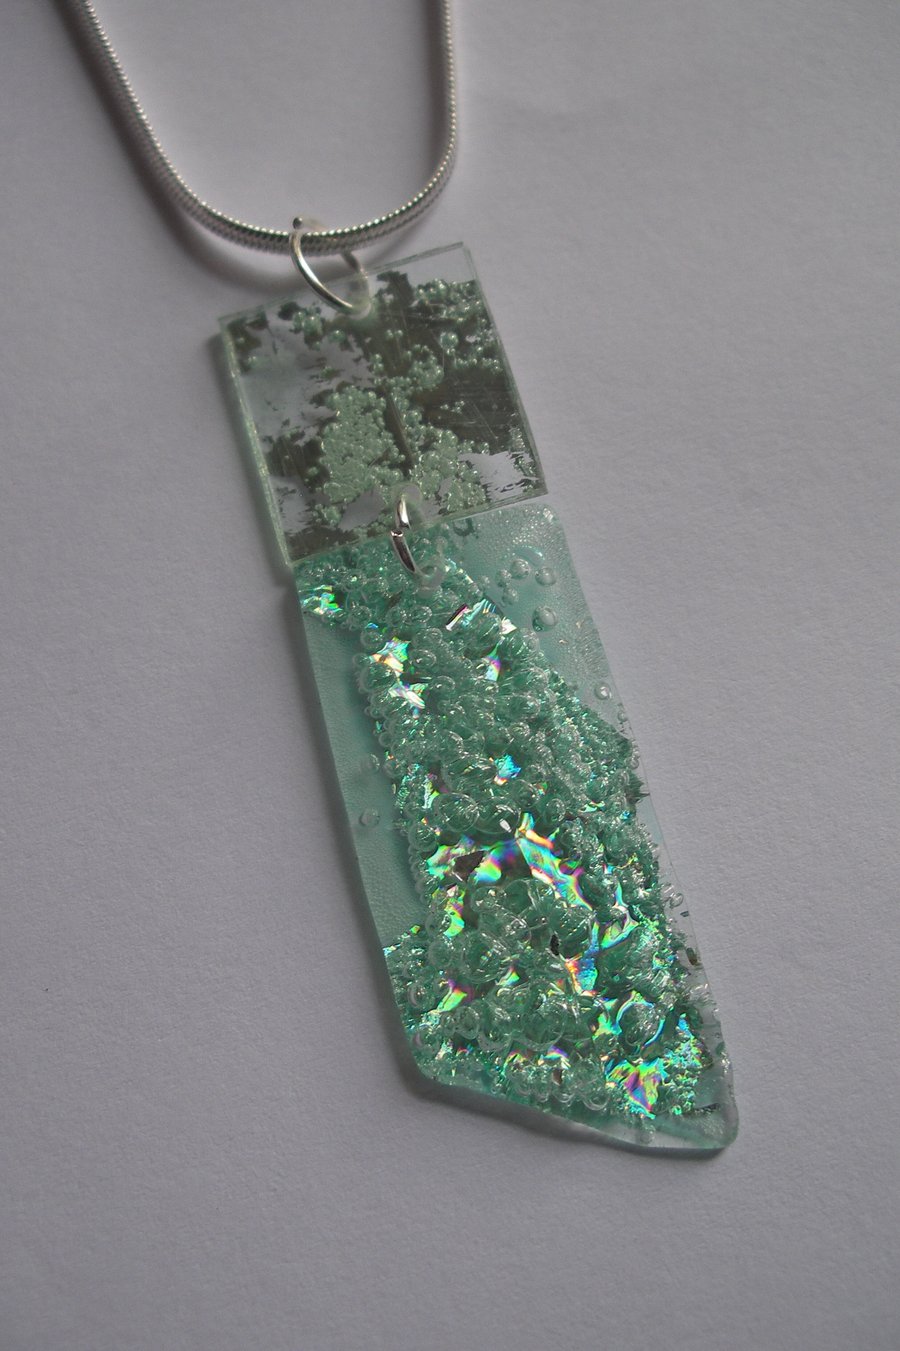 Pale turquoise and green two piece pendant.